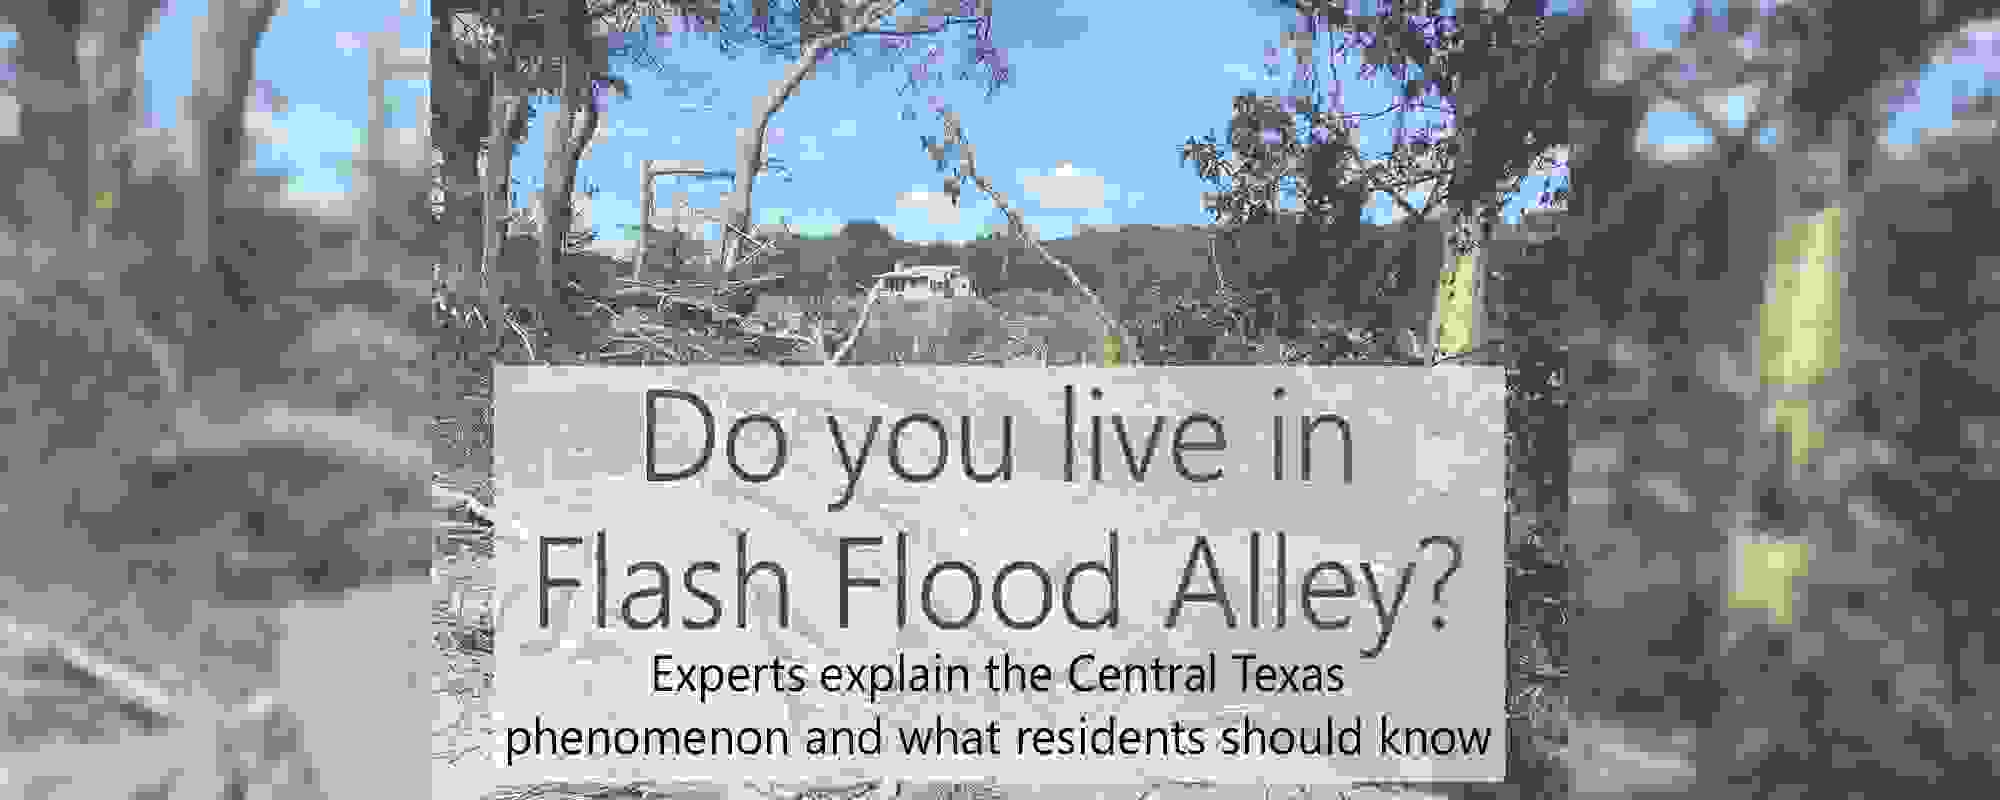 Do you live in Flash Flood Alley?